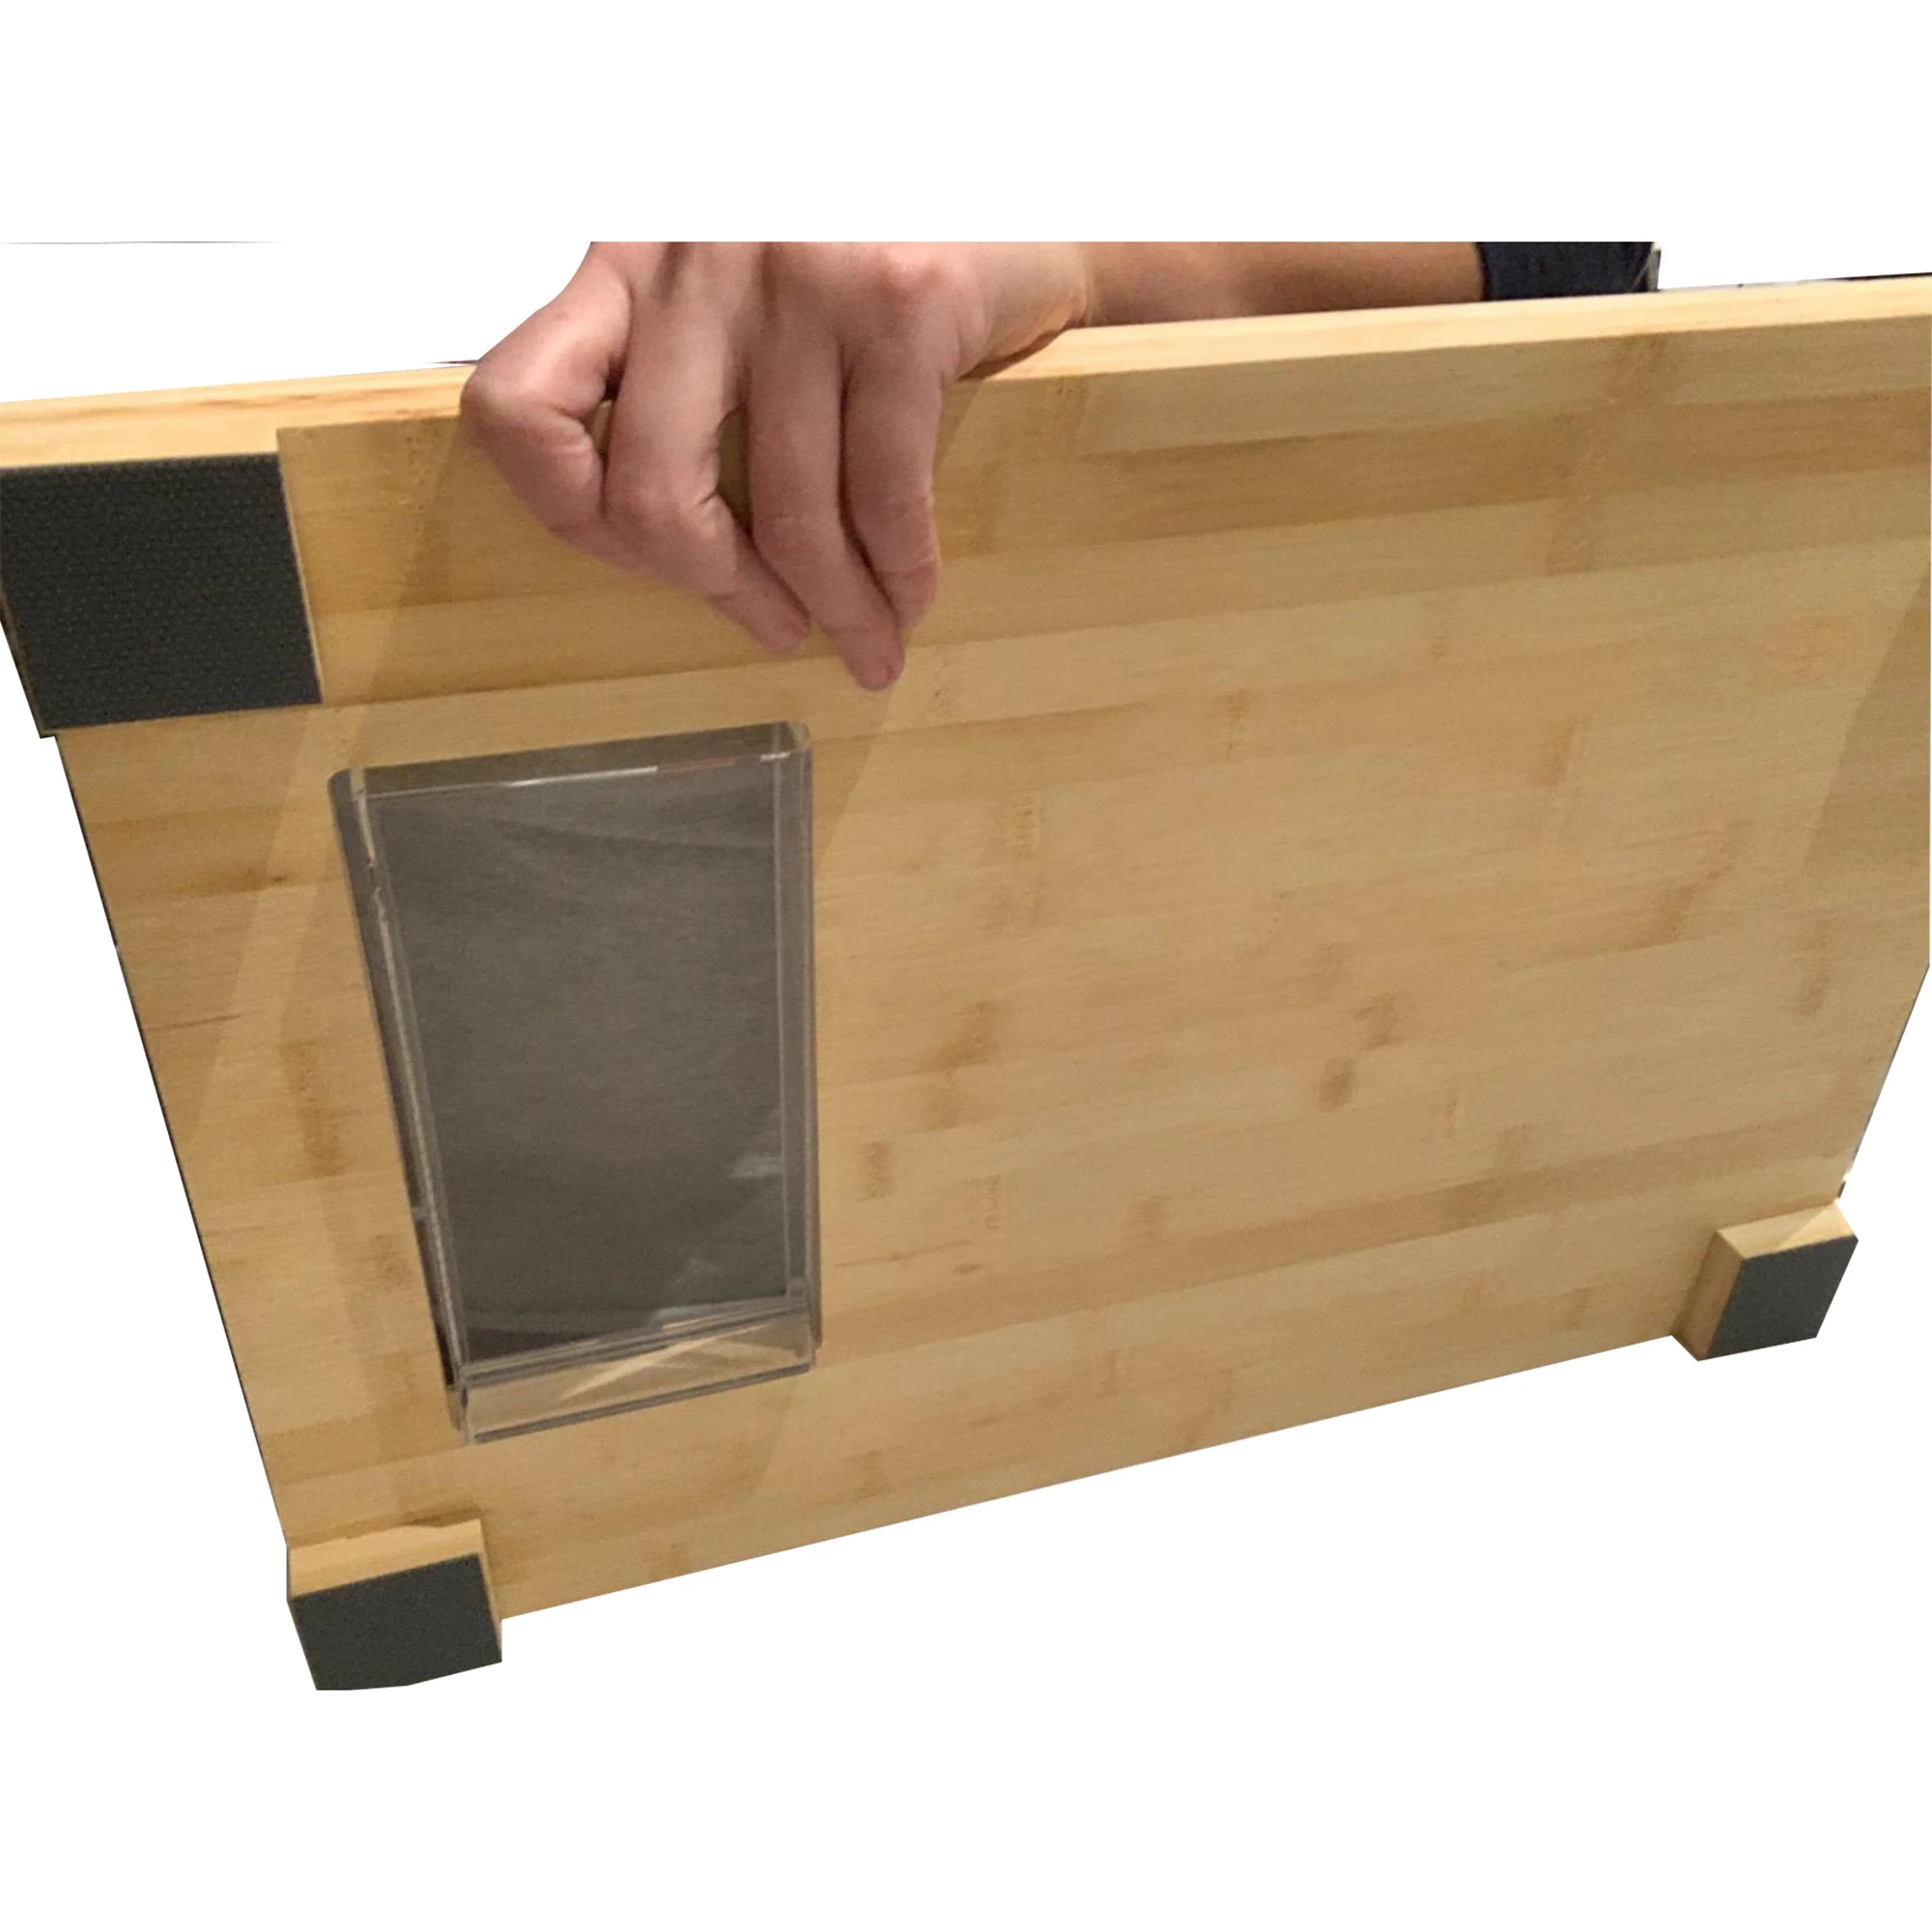 Original Bamboo Cutting Board With Handle For Kitchen, With Built-In Compartments And Juice Grooves Placing a tablet